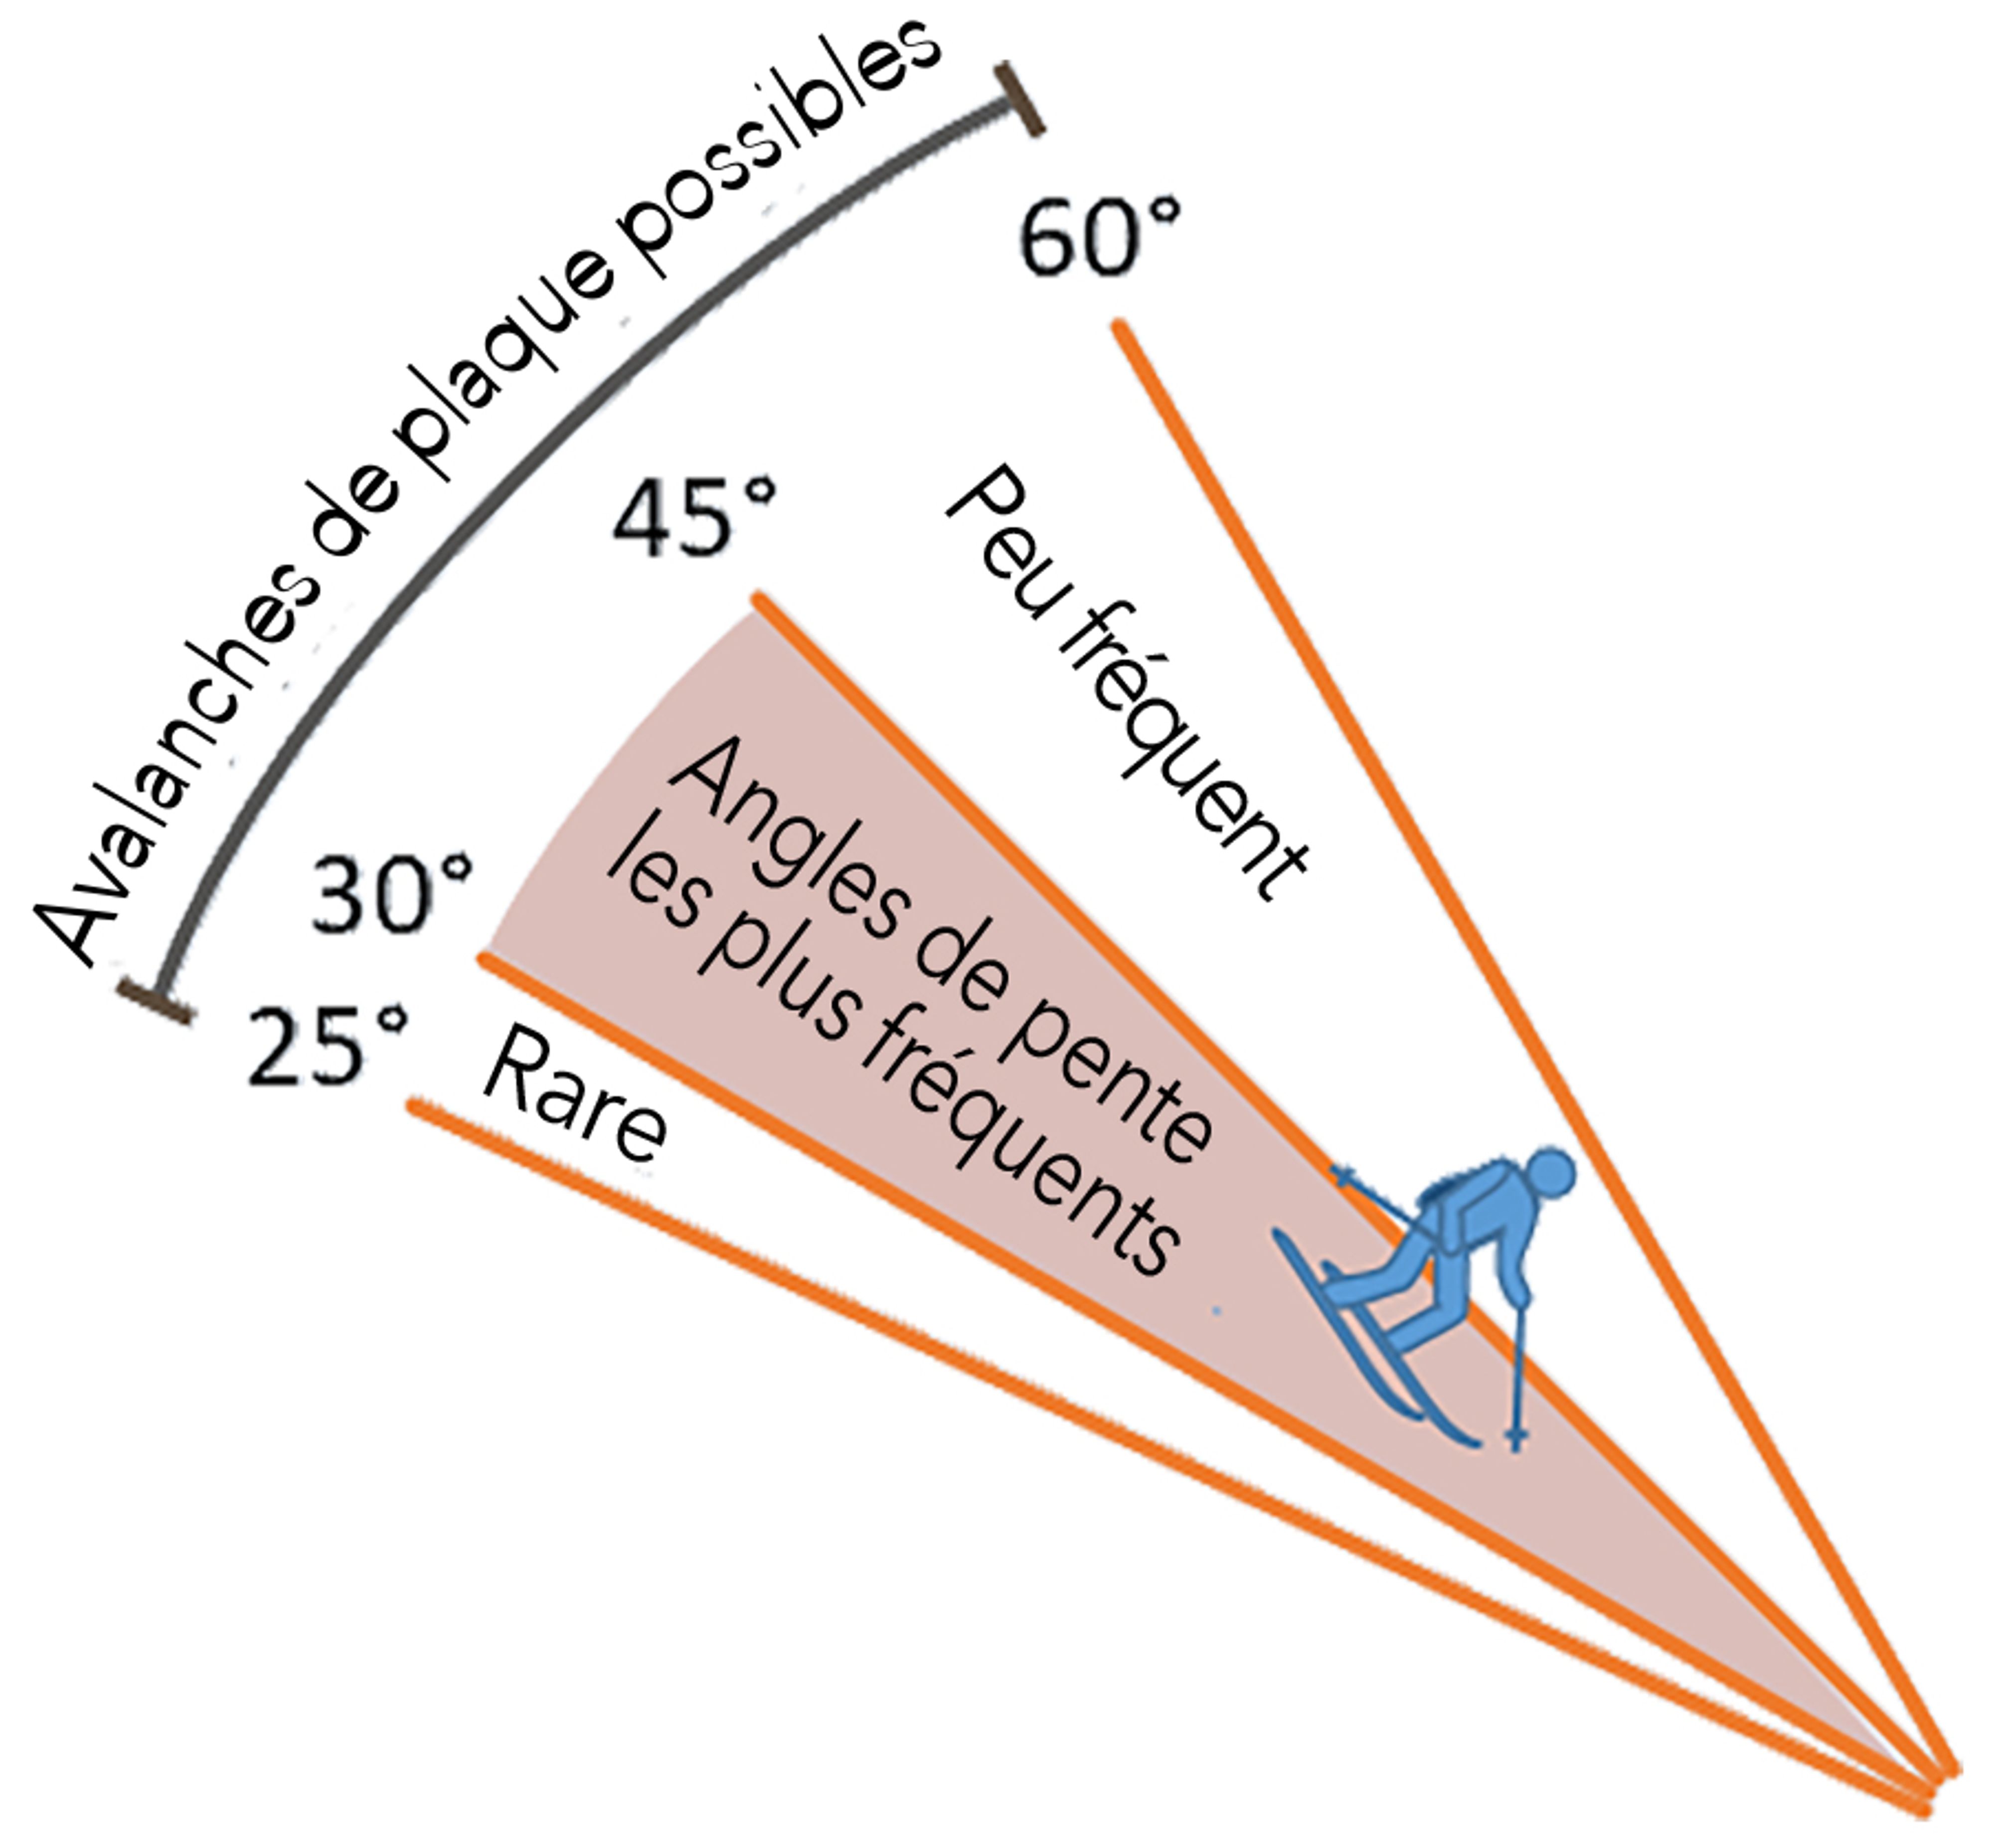 Slope angles on which avalanches occur tend to be those favoured by skiers, snowboarders, and snowmobilers.